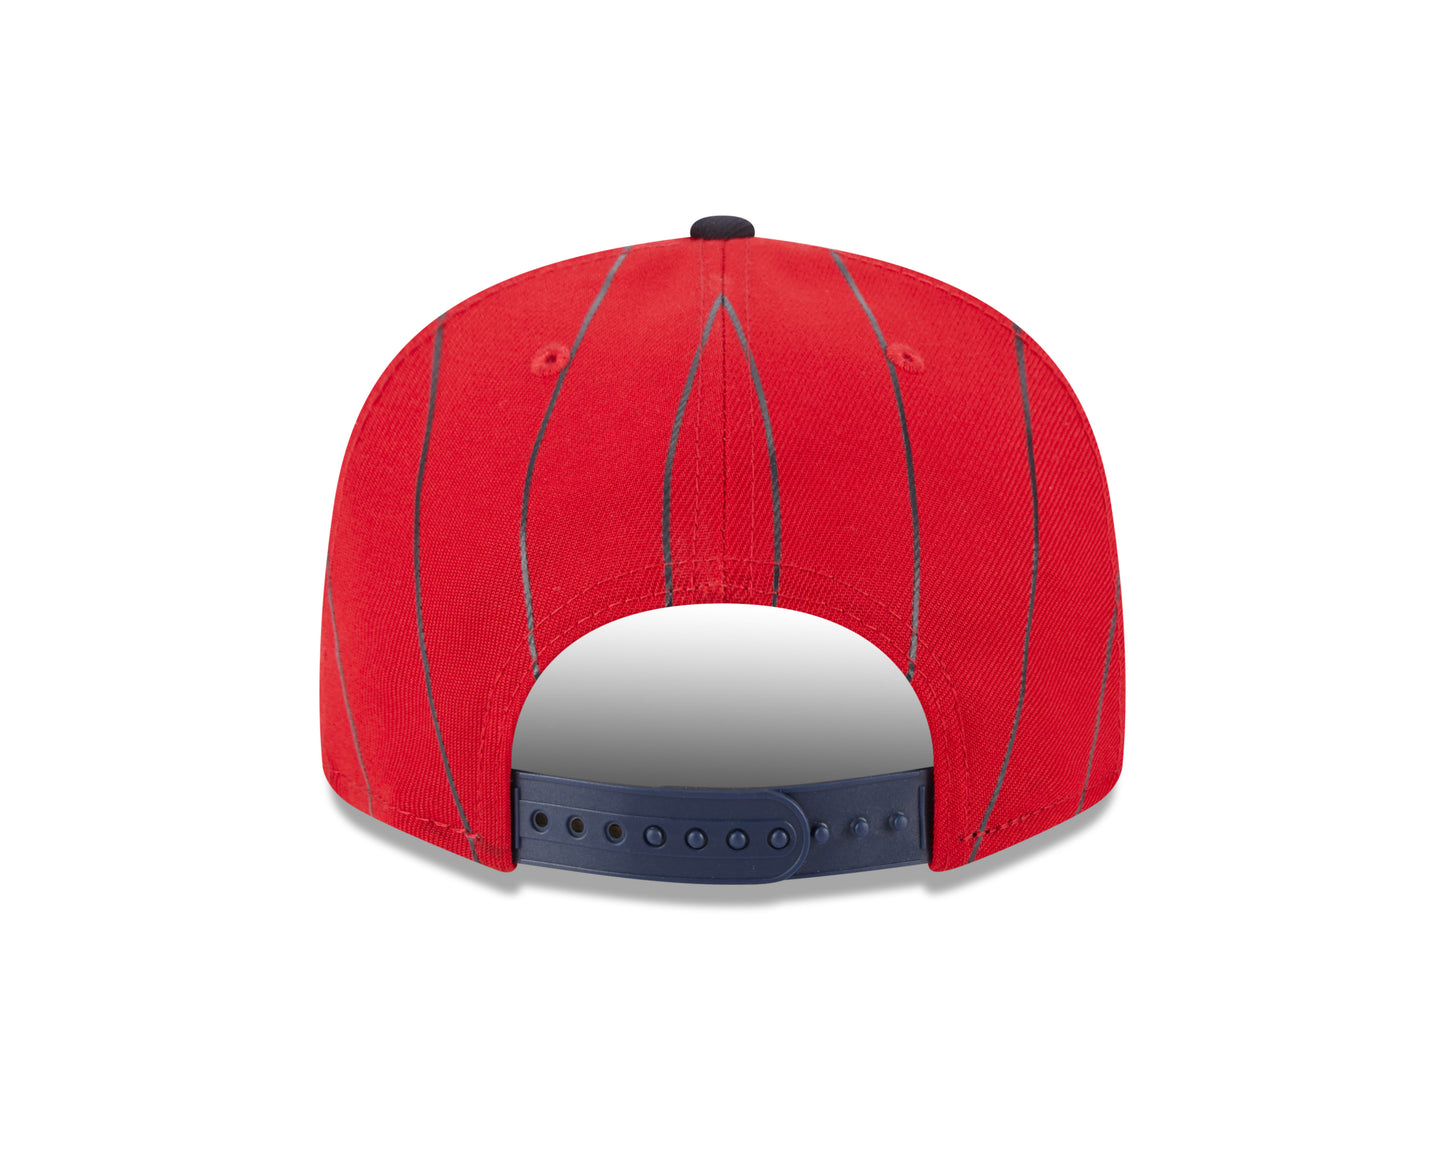 St. Louis Cardinals Red/Navy Vintage New Era 9FIFTY Snapback Hat